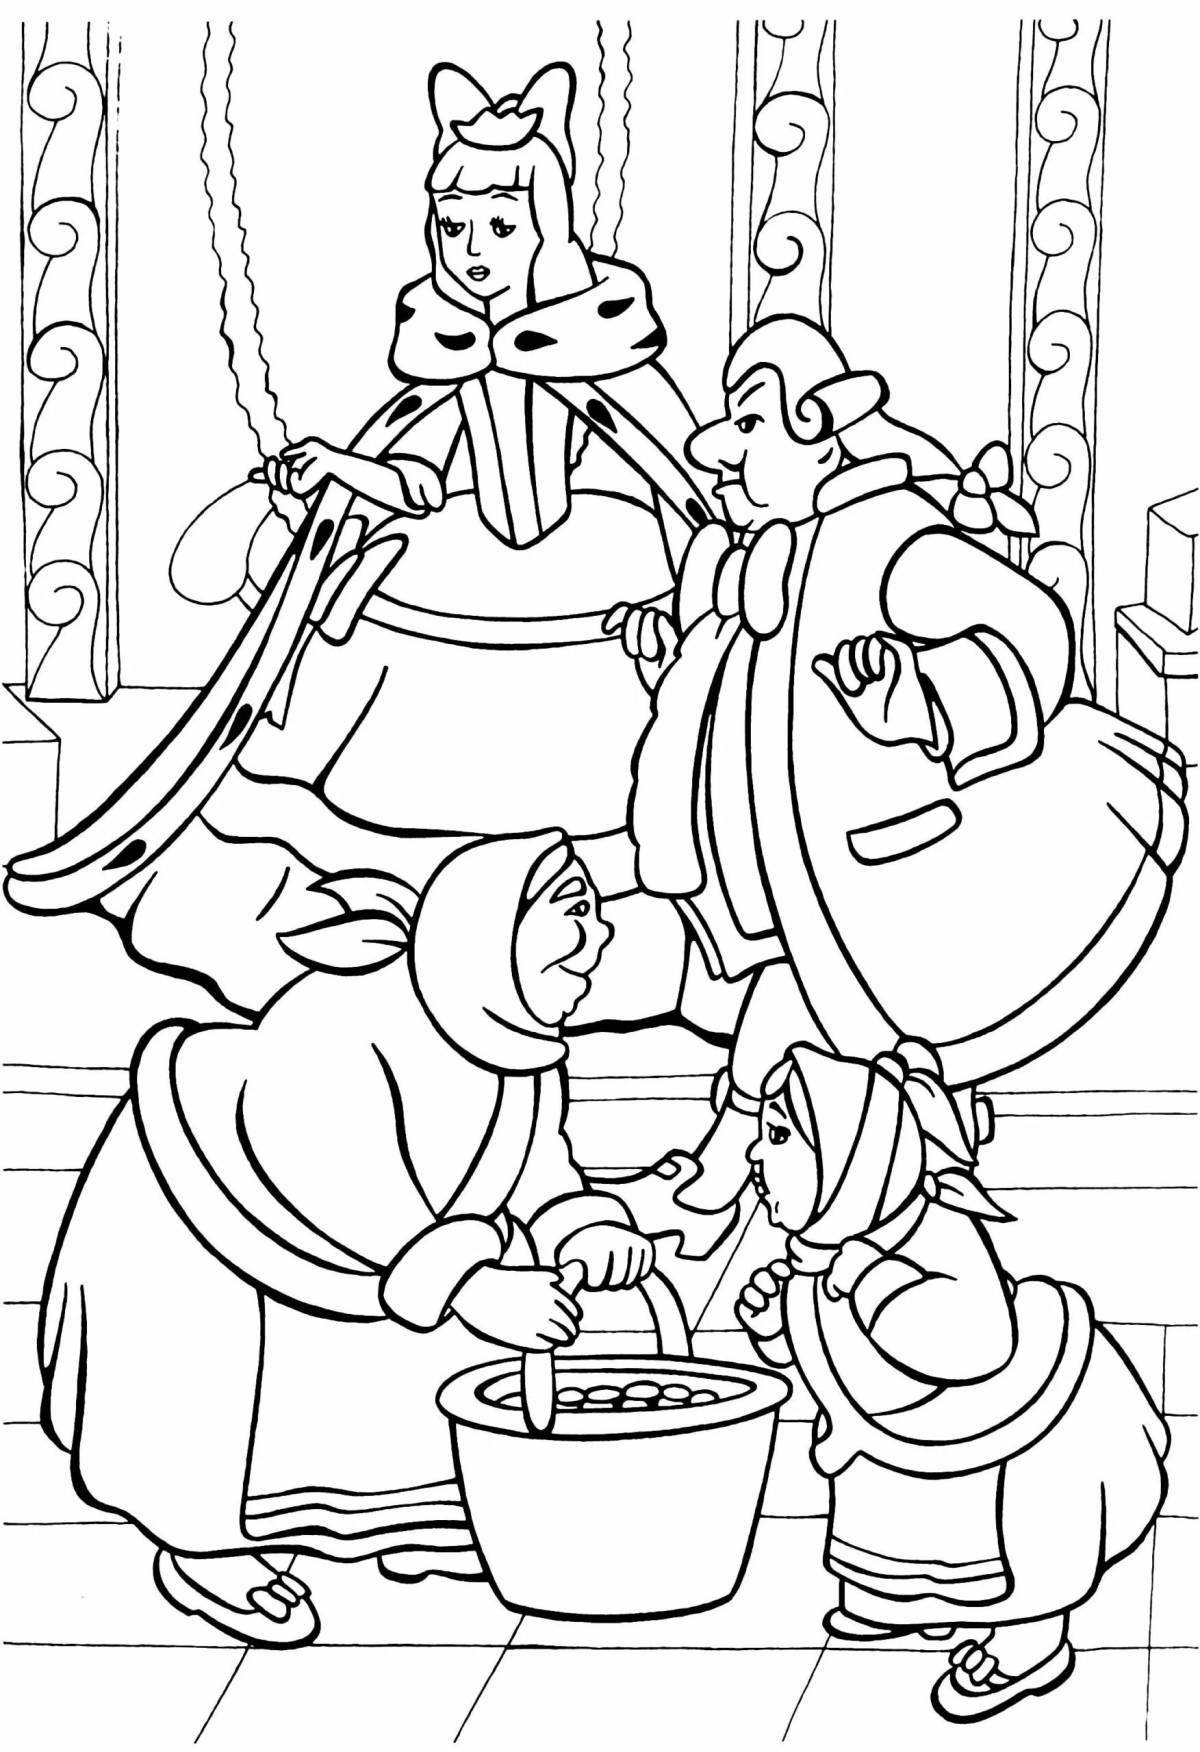 Solar coloring page 12